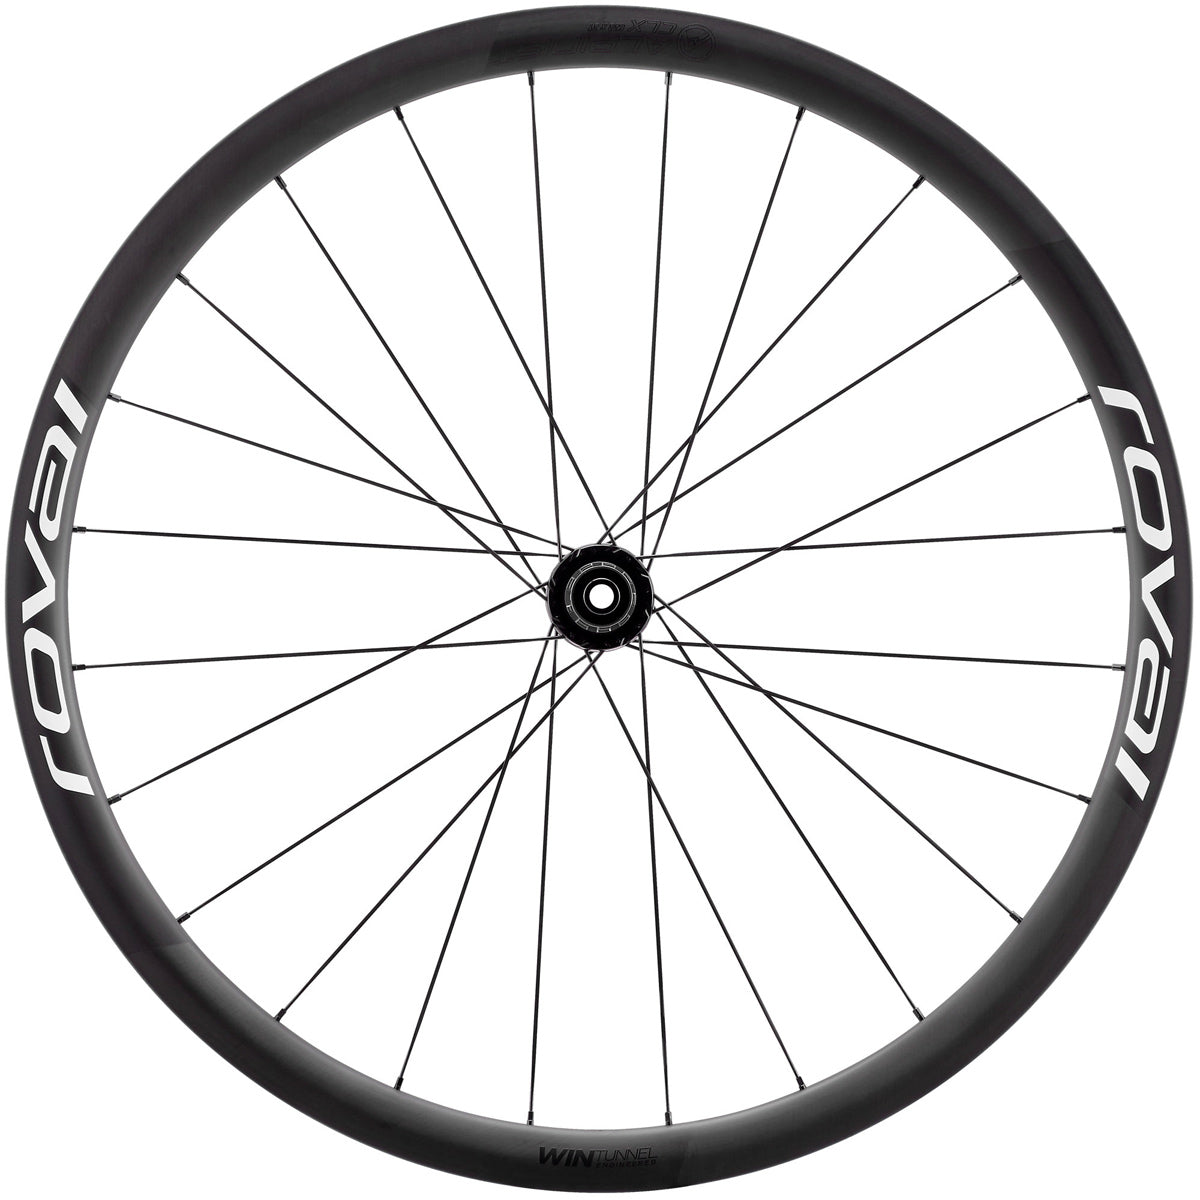 Roue Roval CLX Alpinist Disc arriere- Noir blanc | All4cycling